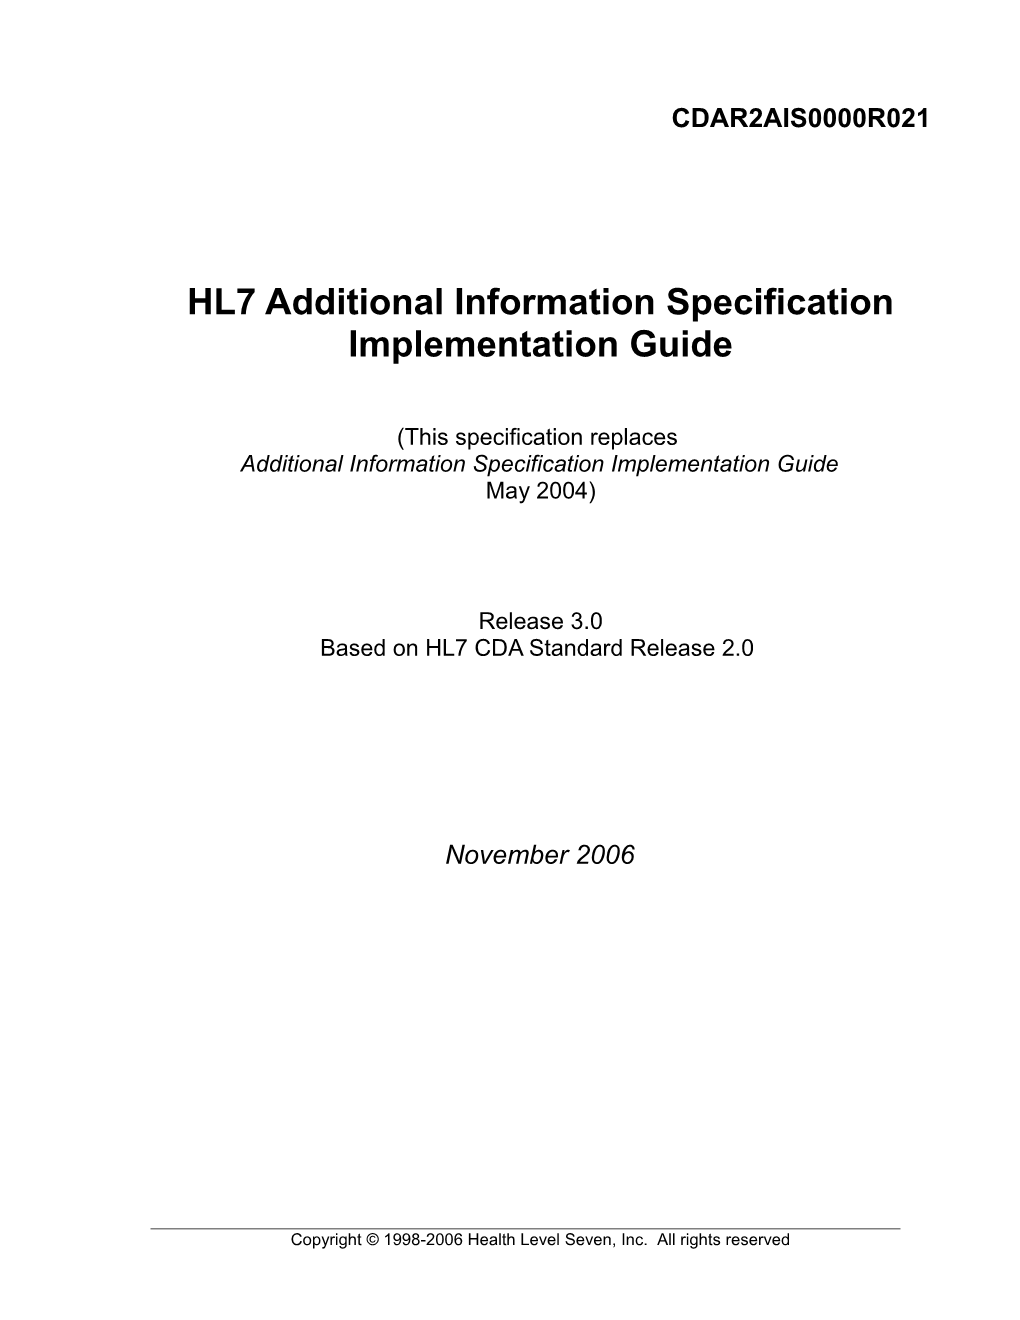 HL7 Additional Information Specification